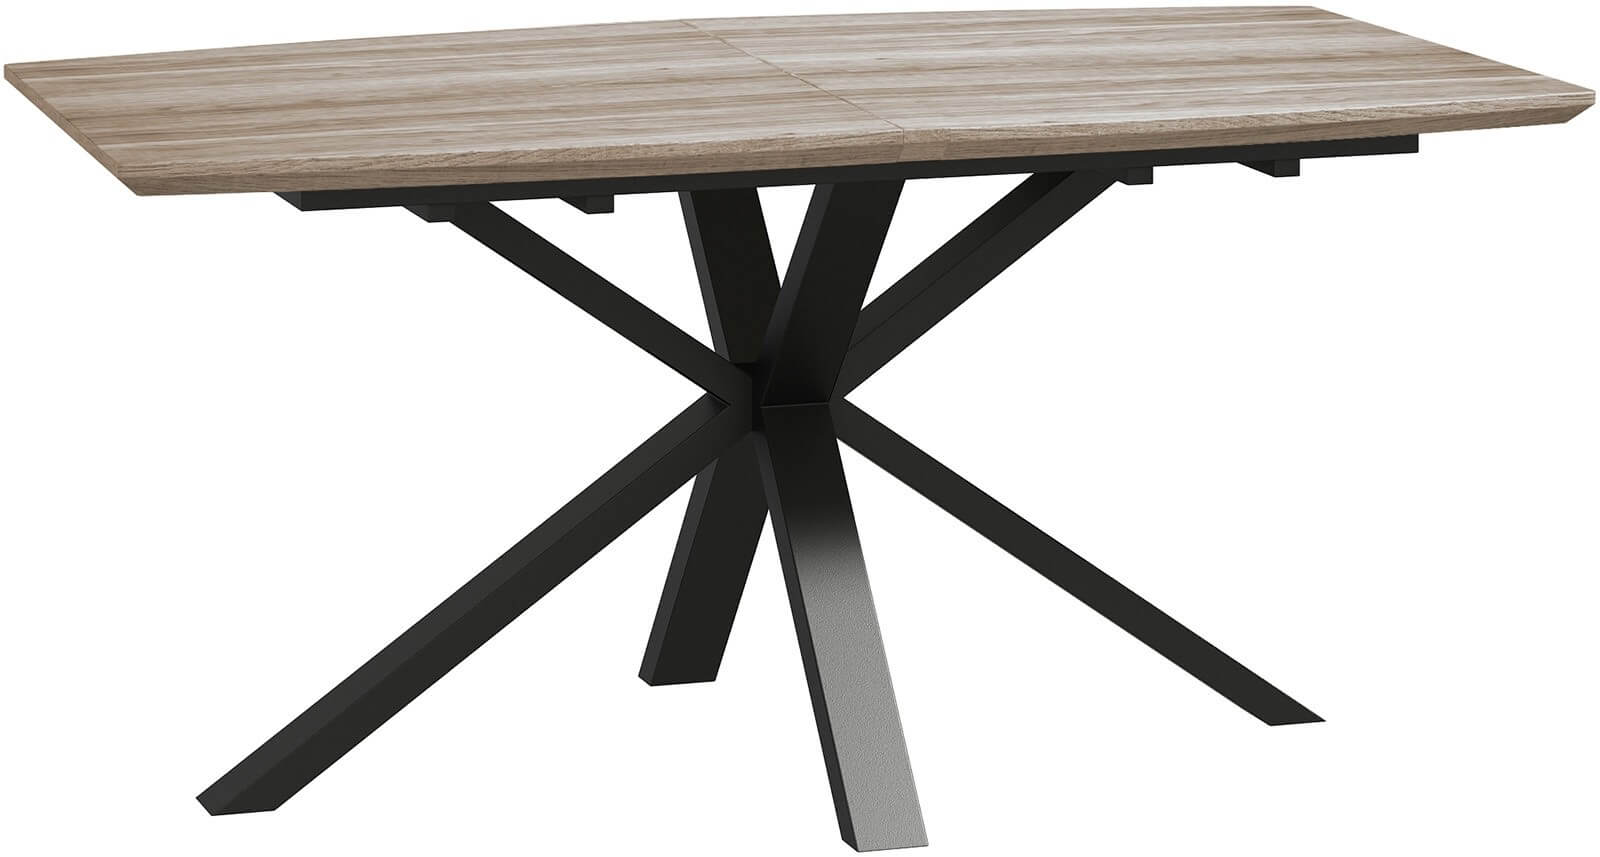 Showing image for Detroit extending dining table